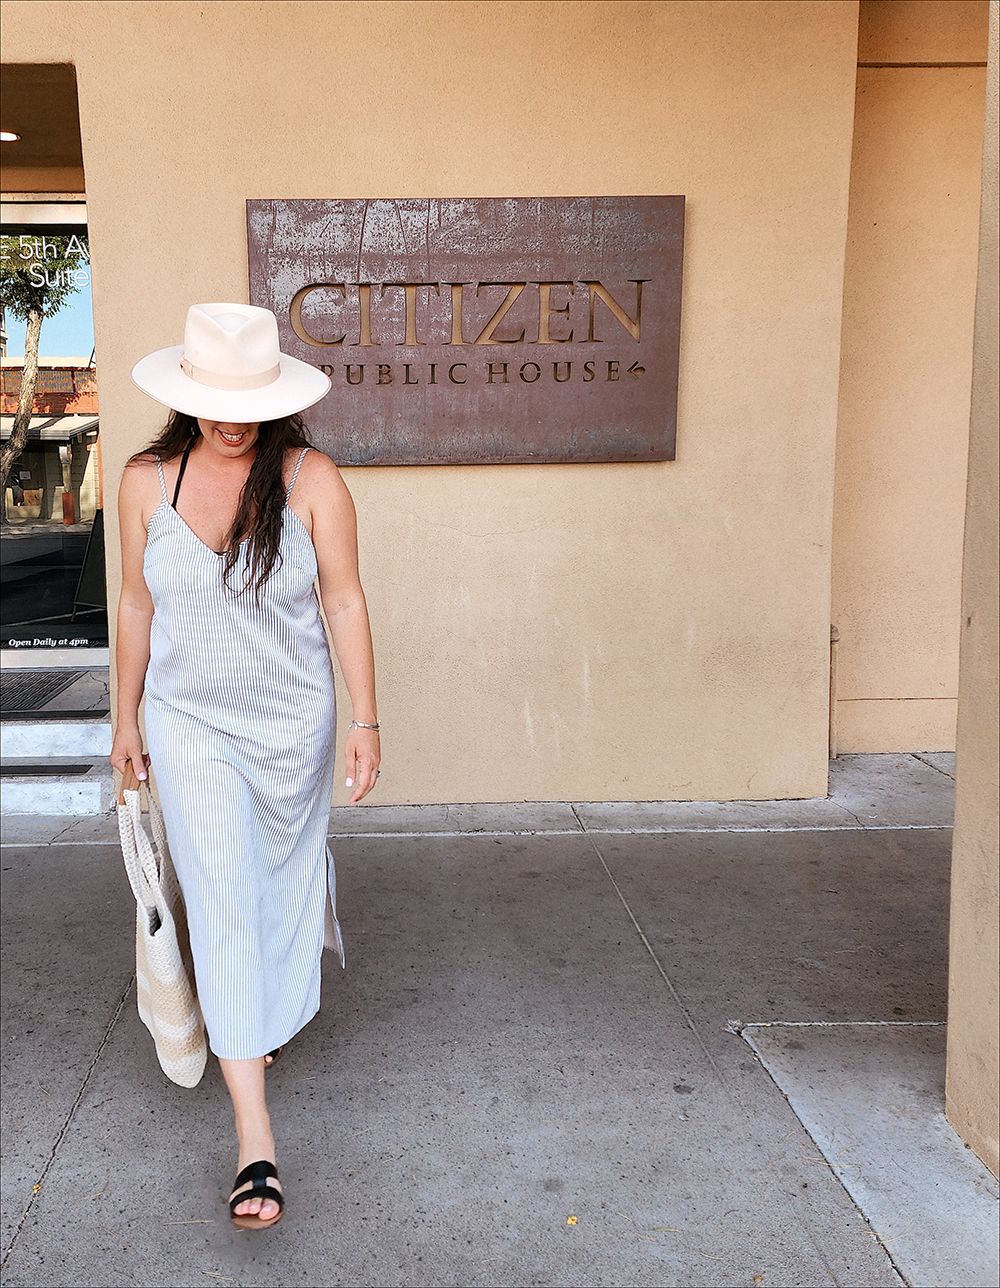 Scottsdale Girls Trip- AZ Travel Guide for an Epic Girls Getaway! Dining at Citizen Public House